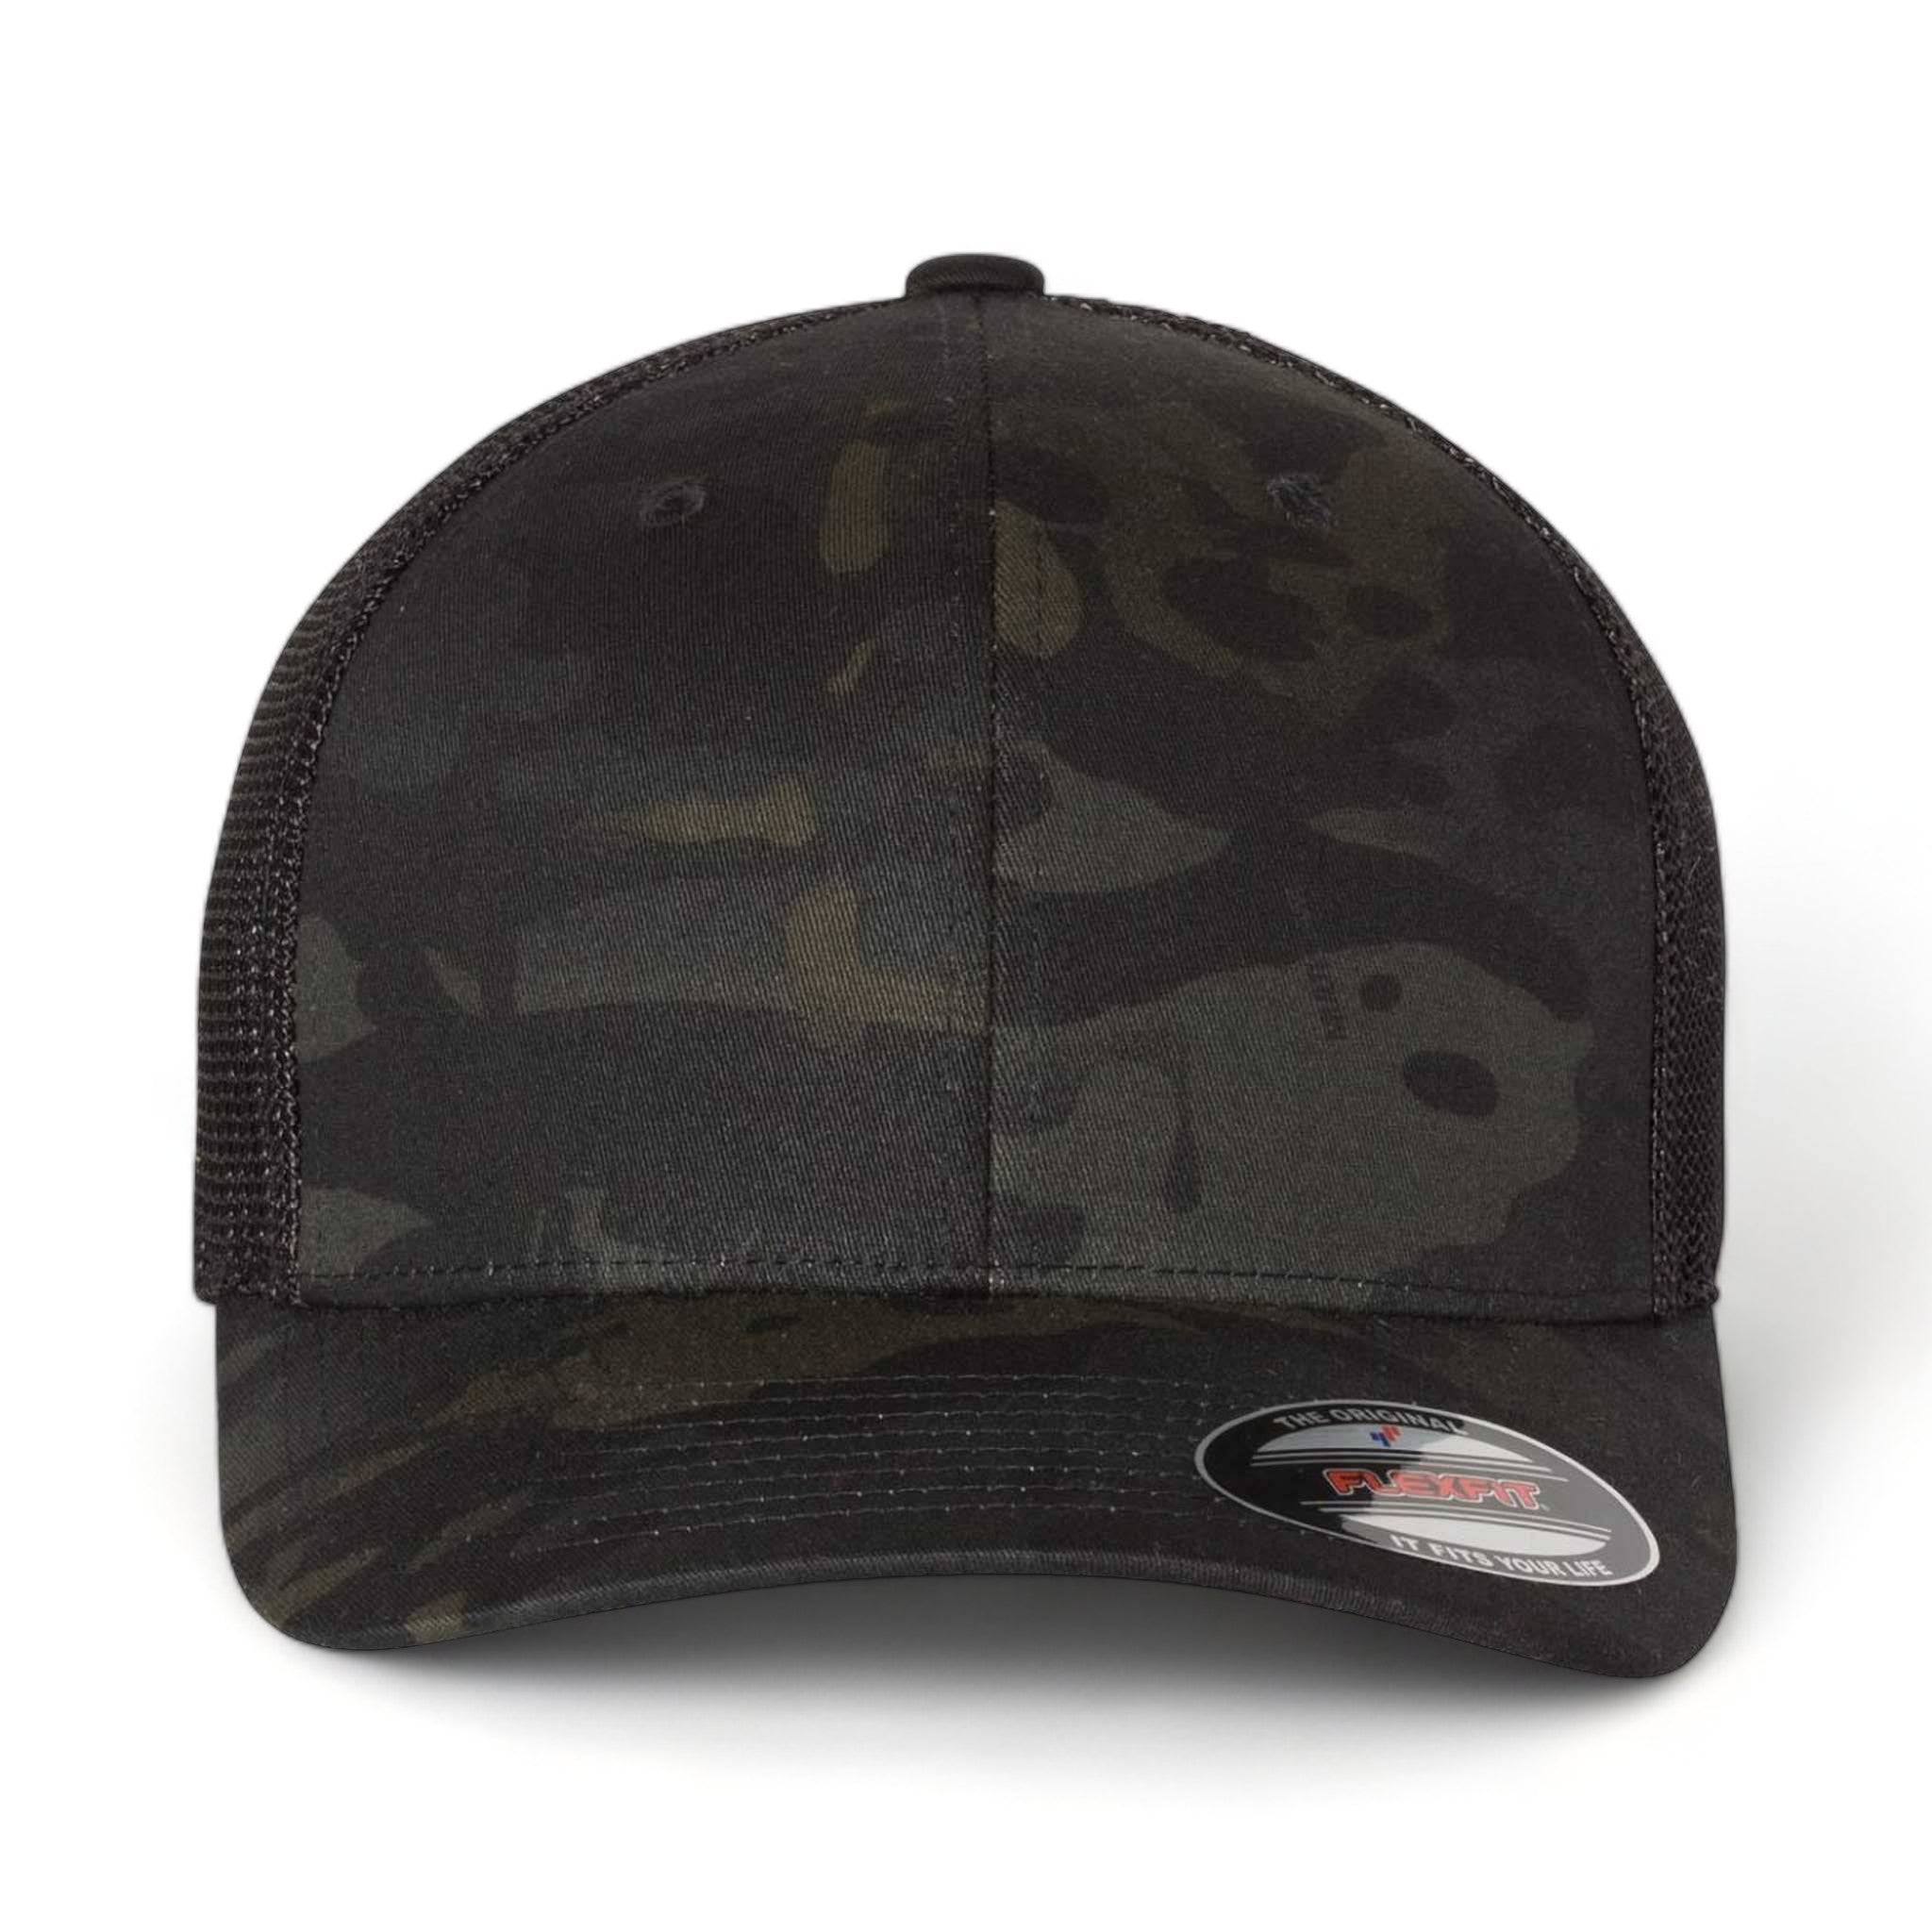 Front view of Flexfit 6511 custom hat in multicam black and black